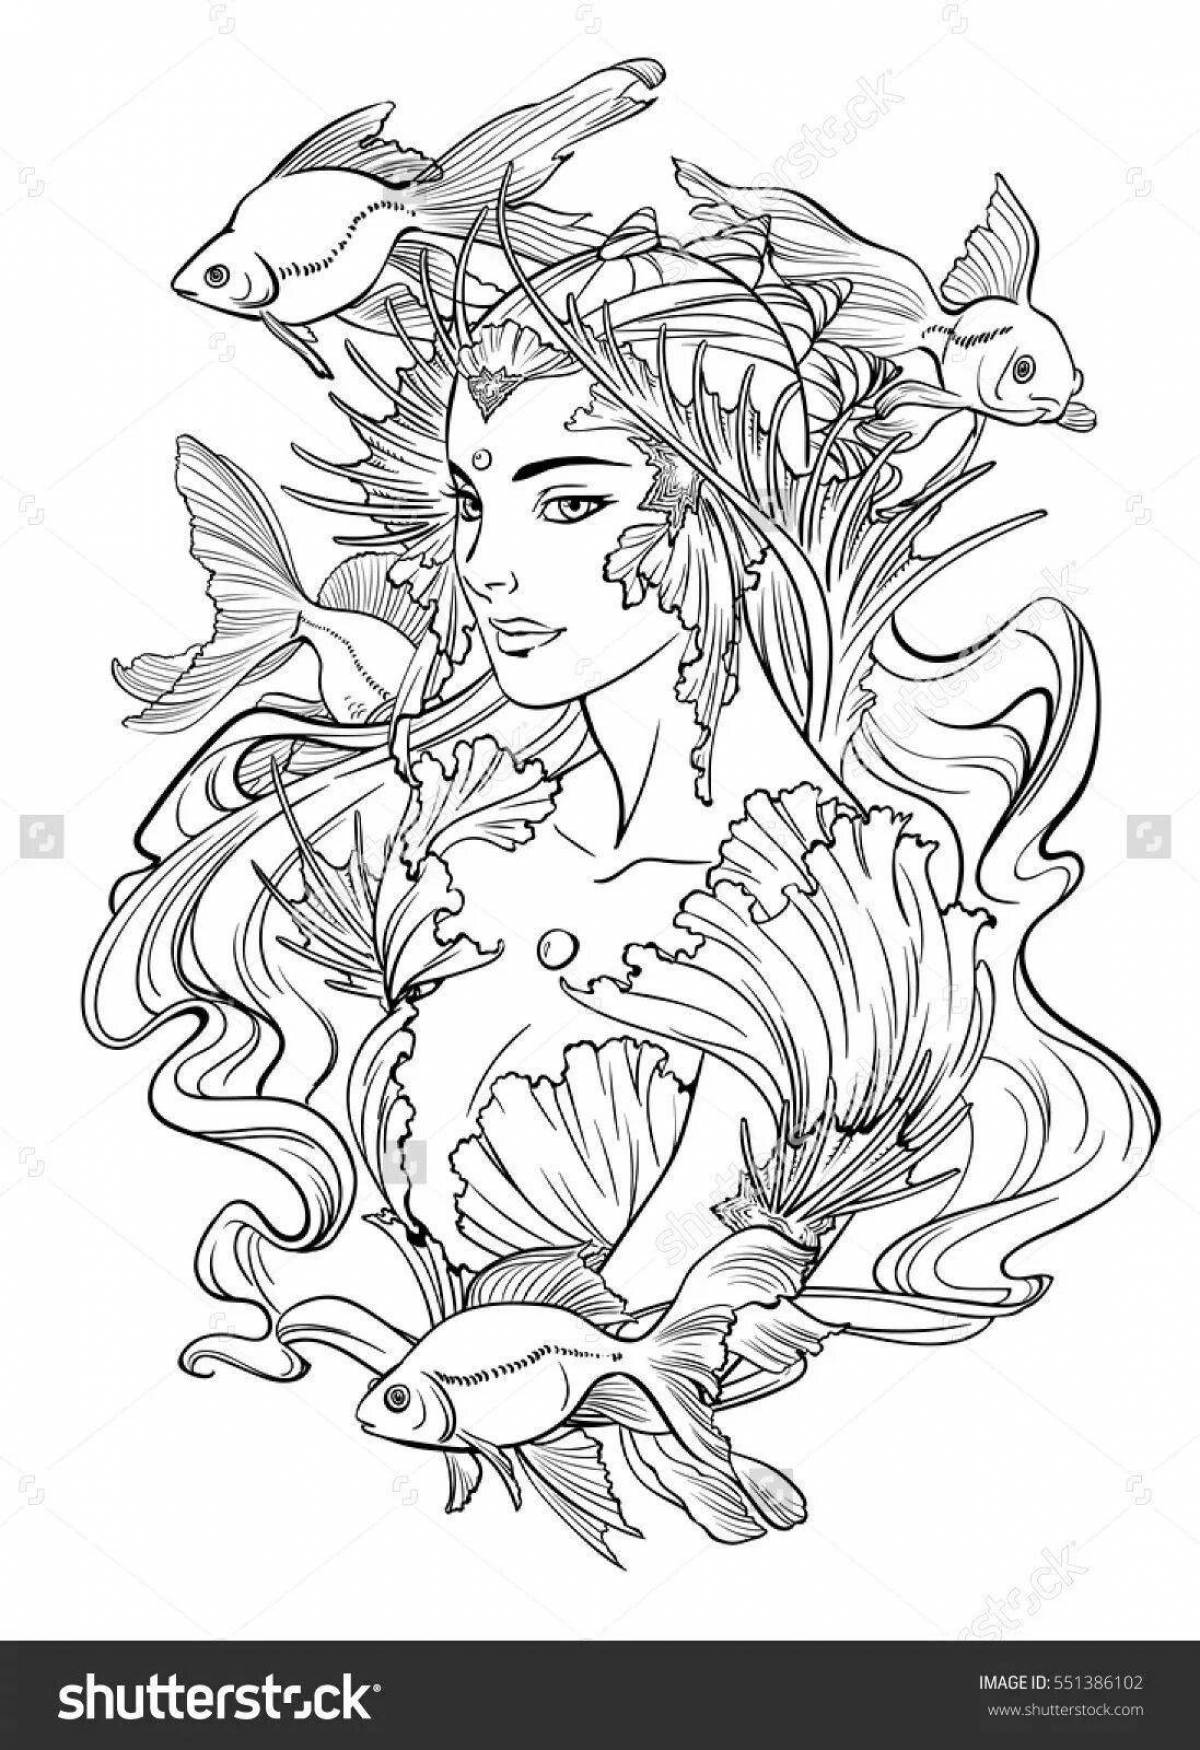 Ethereal coloring pages of a witch from Slavic myths